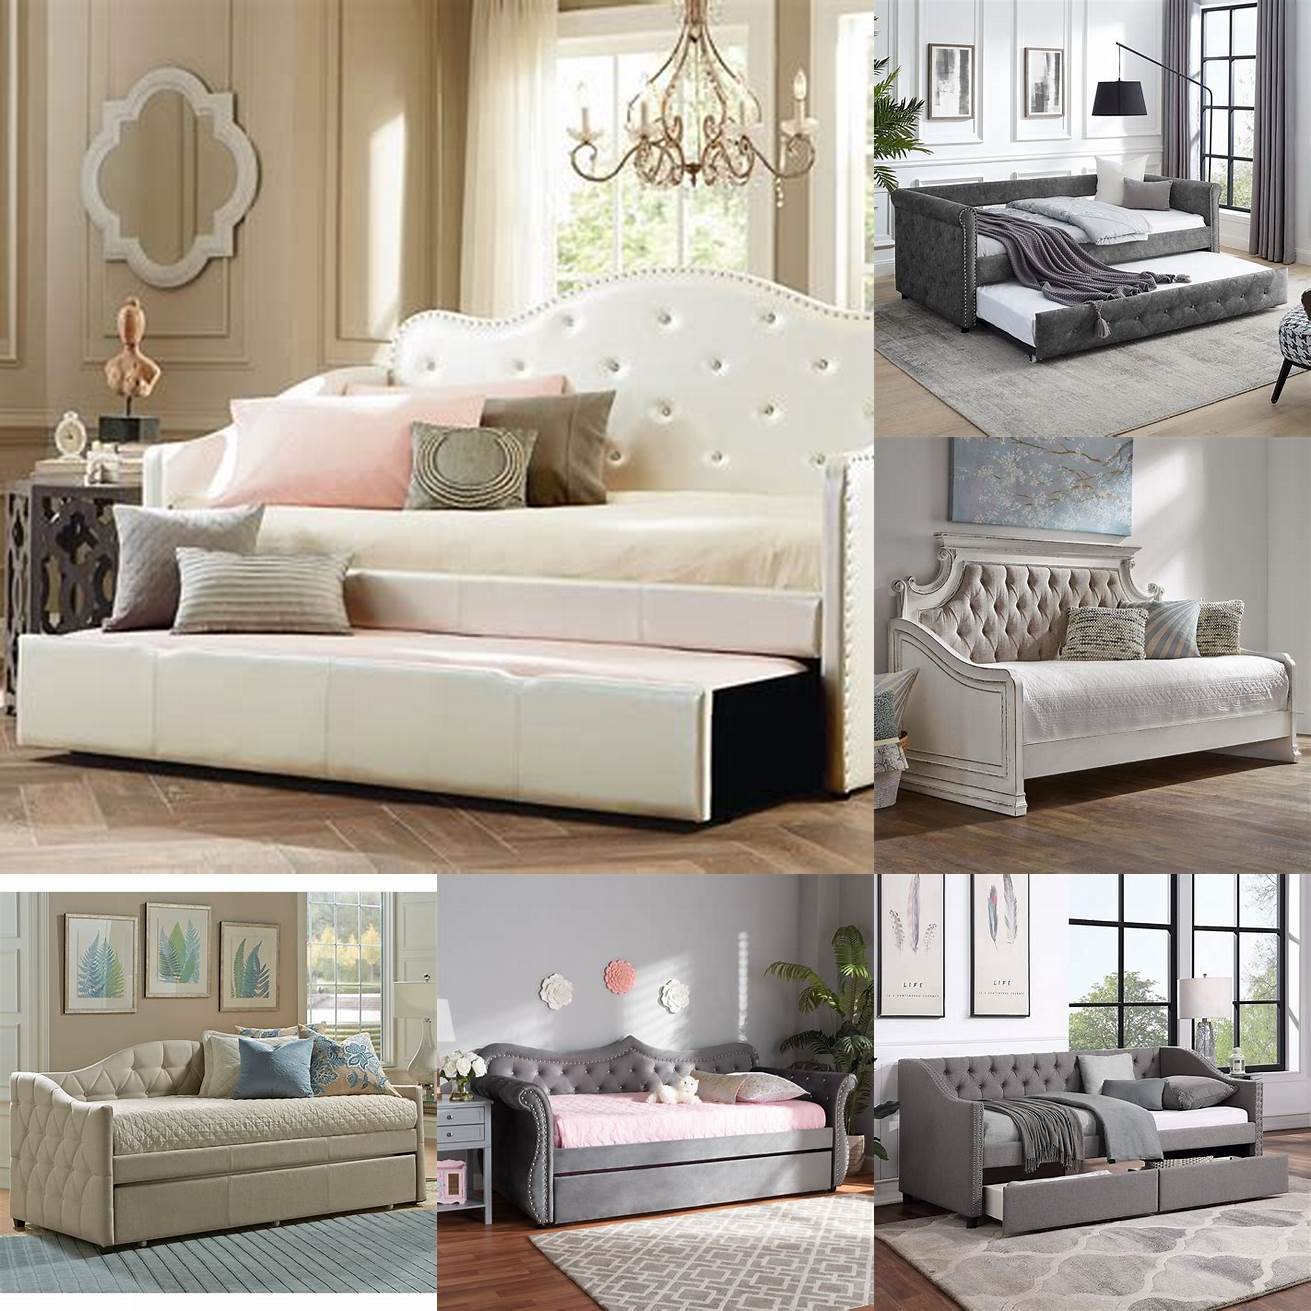 Upholstered day bed with tufted backrest